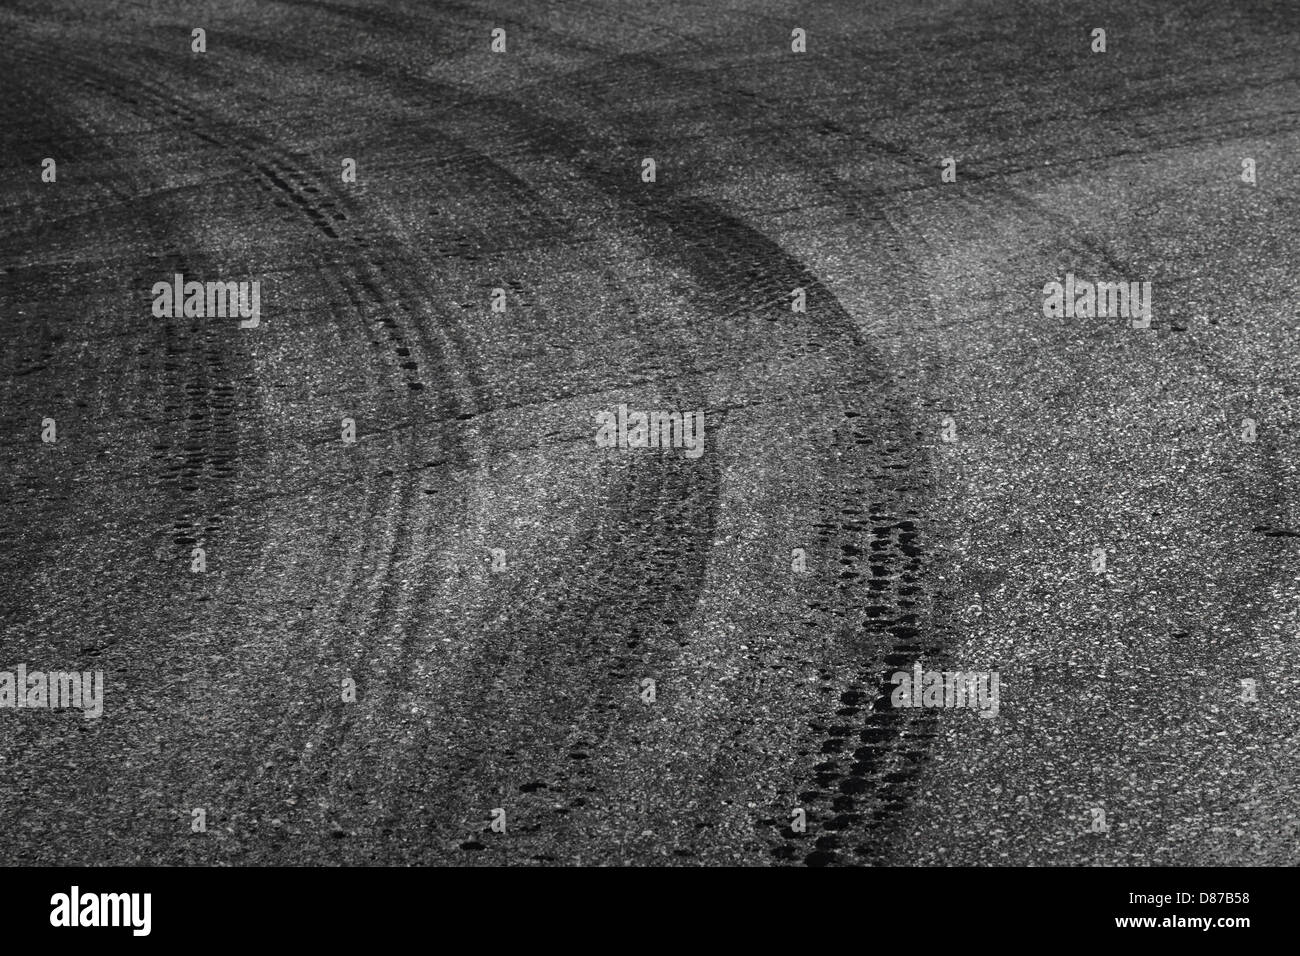 Dangerous turn. Abstract road background with tires tracks on dark asphalt Stock Photo